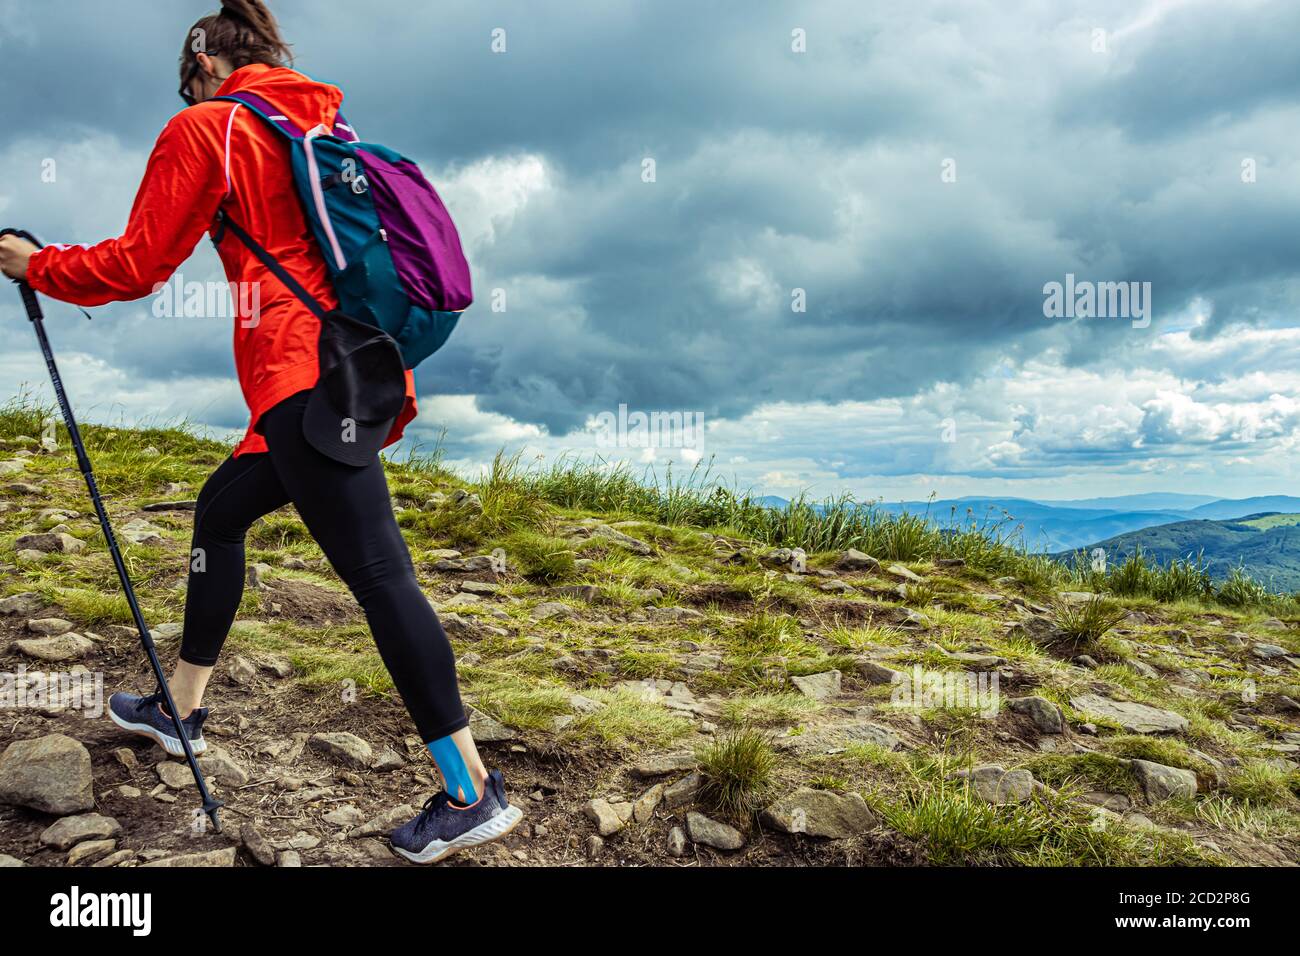 Girl hiking in the mountains with backpack. Walking on mountain